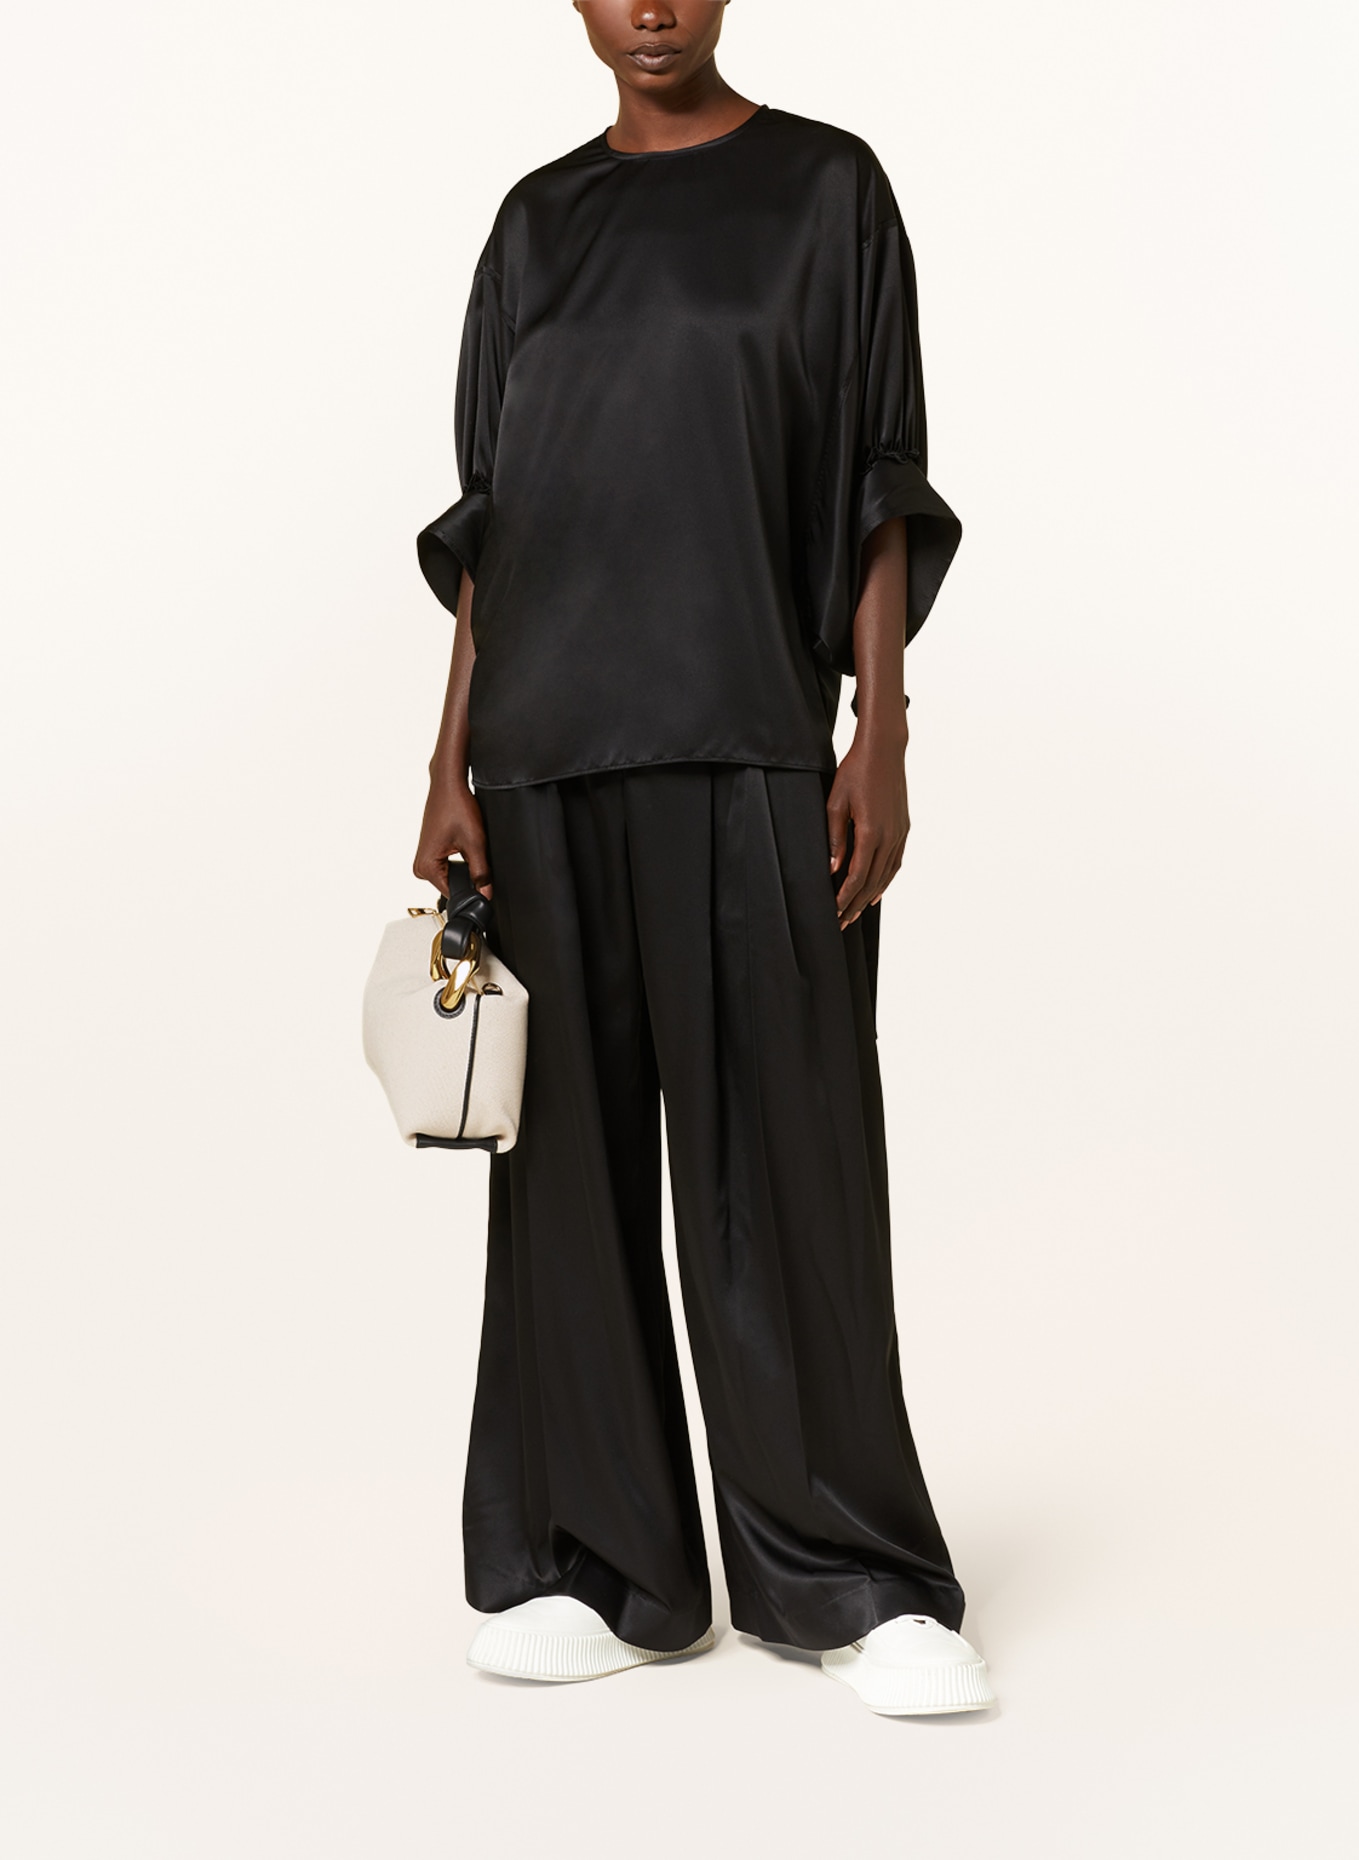 JW ANDERSON Shirt blouse made of satin with 3/4 sleeves, Color: BLACK (Image 2)